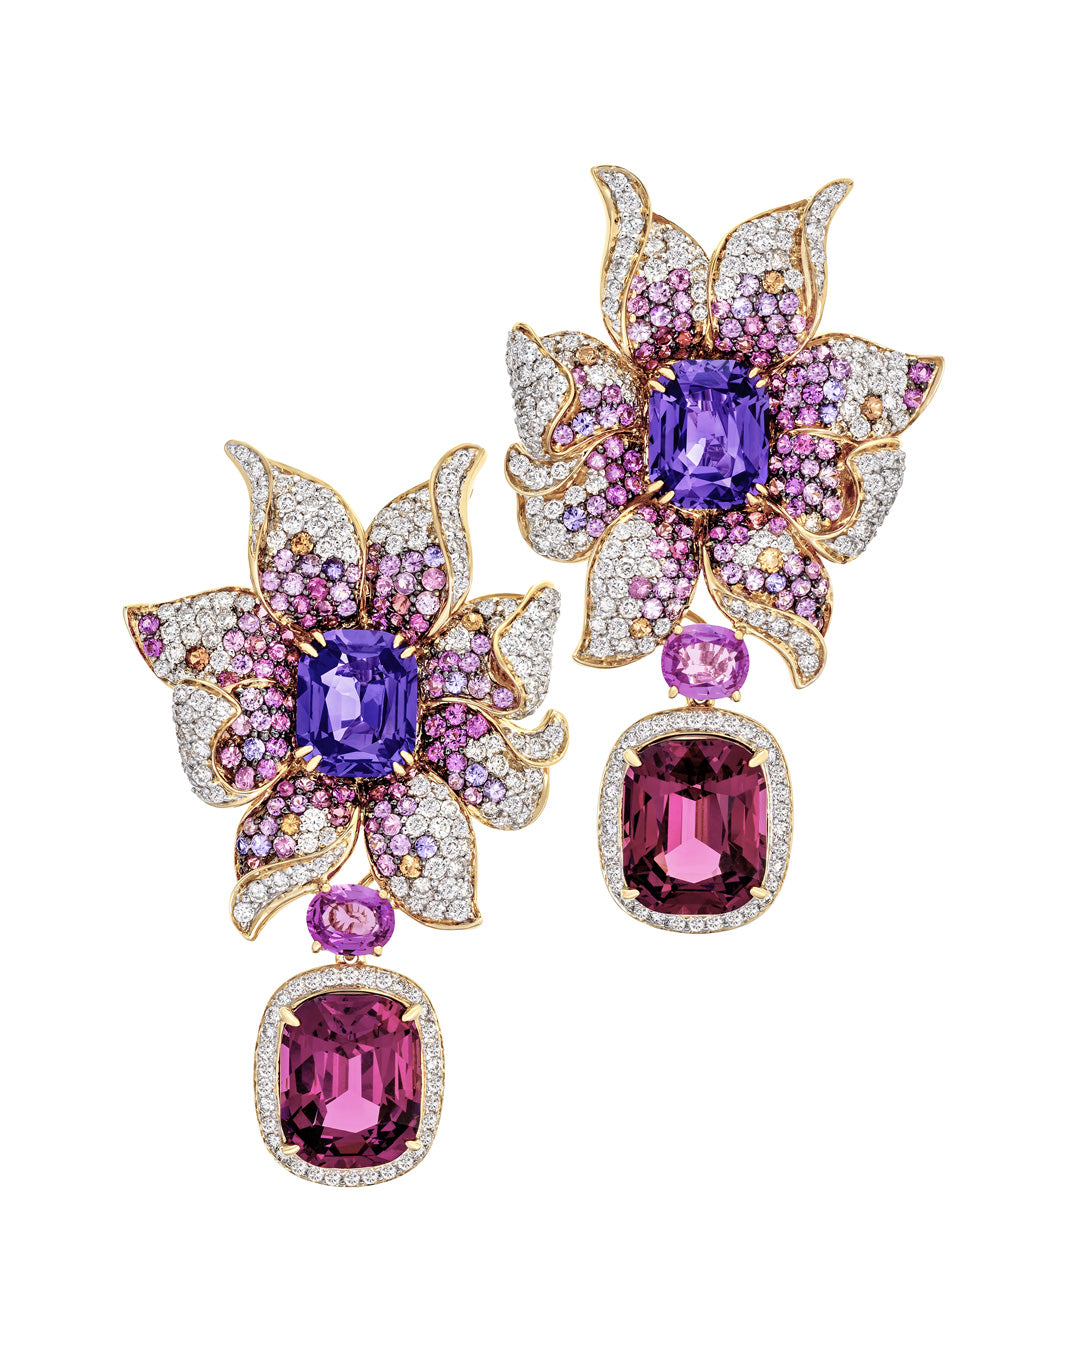 Purple Sapphire Orchid Earrings enhanced with a myriad of gemstones with a detachable pair of rhodolite garnet drops, crafted in 18 karat yellow gold